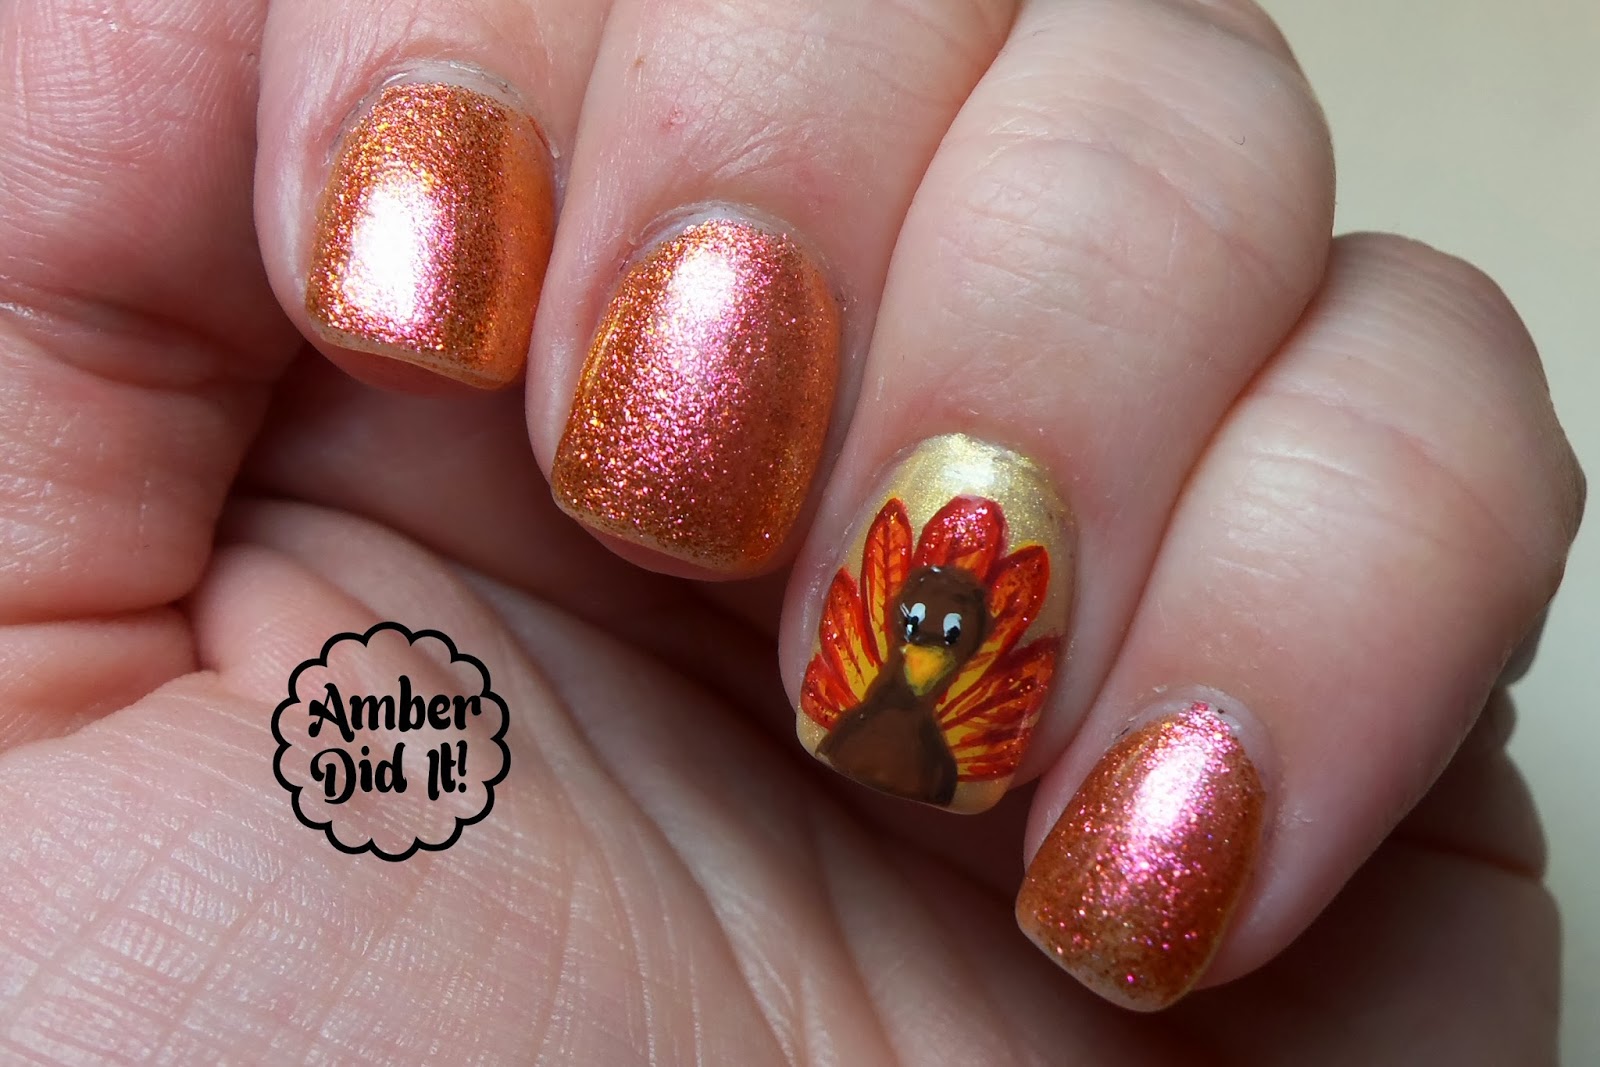 2. "Basic Color Thanksgiving Nail Designs" - wide 5